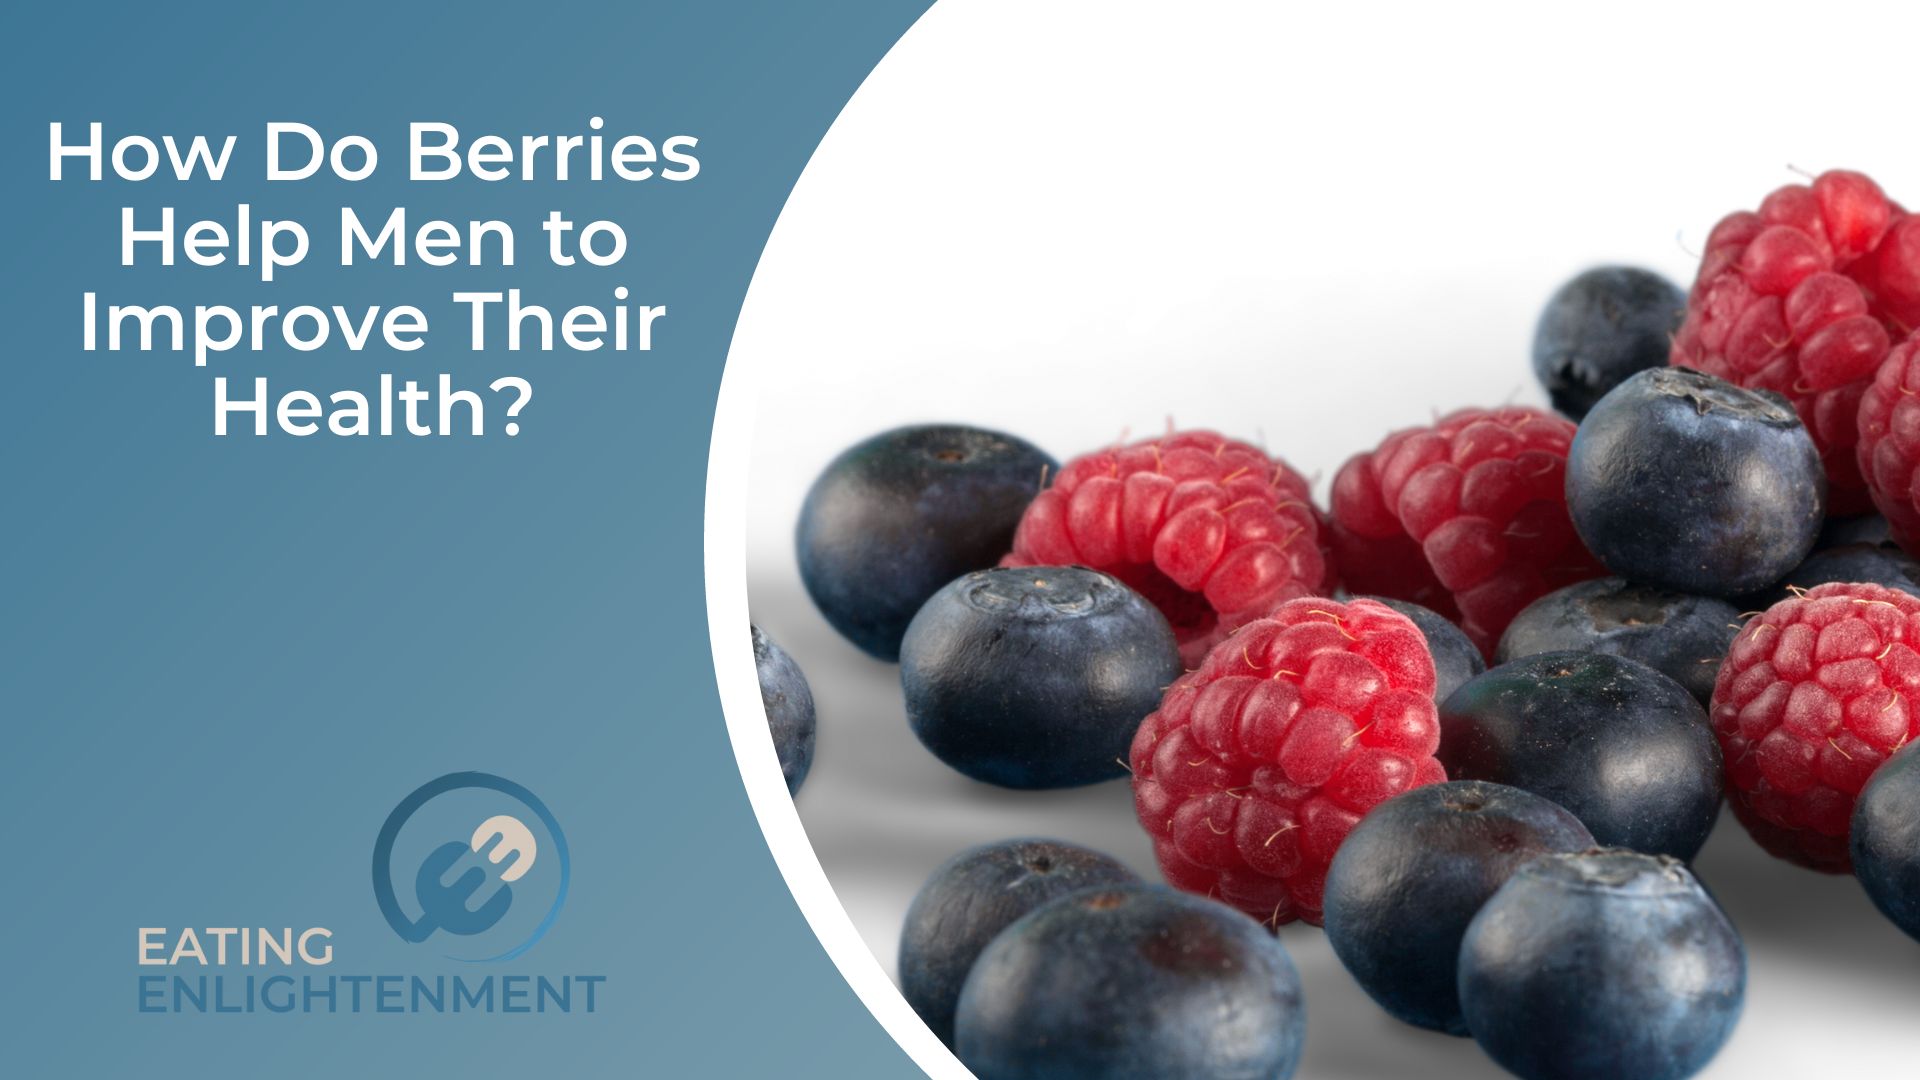 How Do Berries Help Men to Improve Their Health